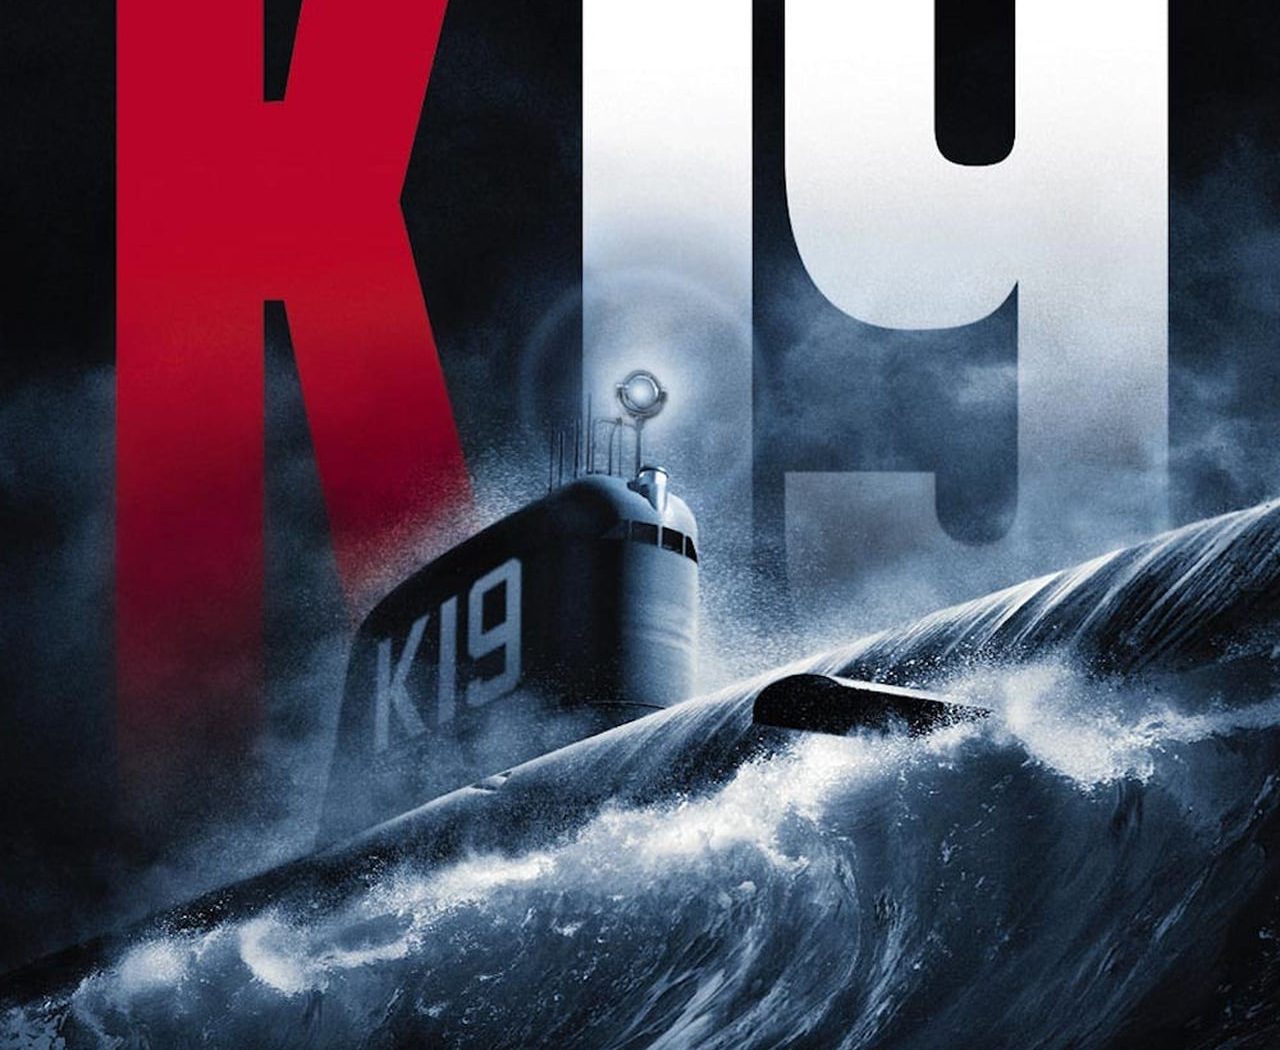 Poster for the movie "K-19: The Widowmaker"